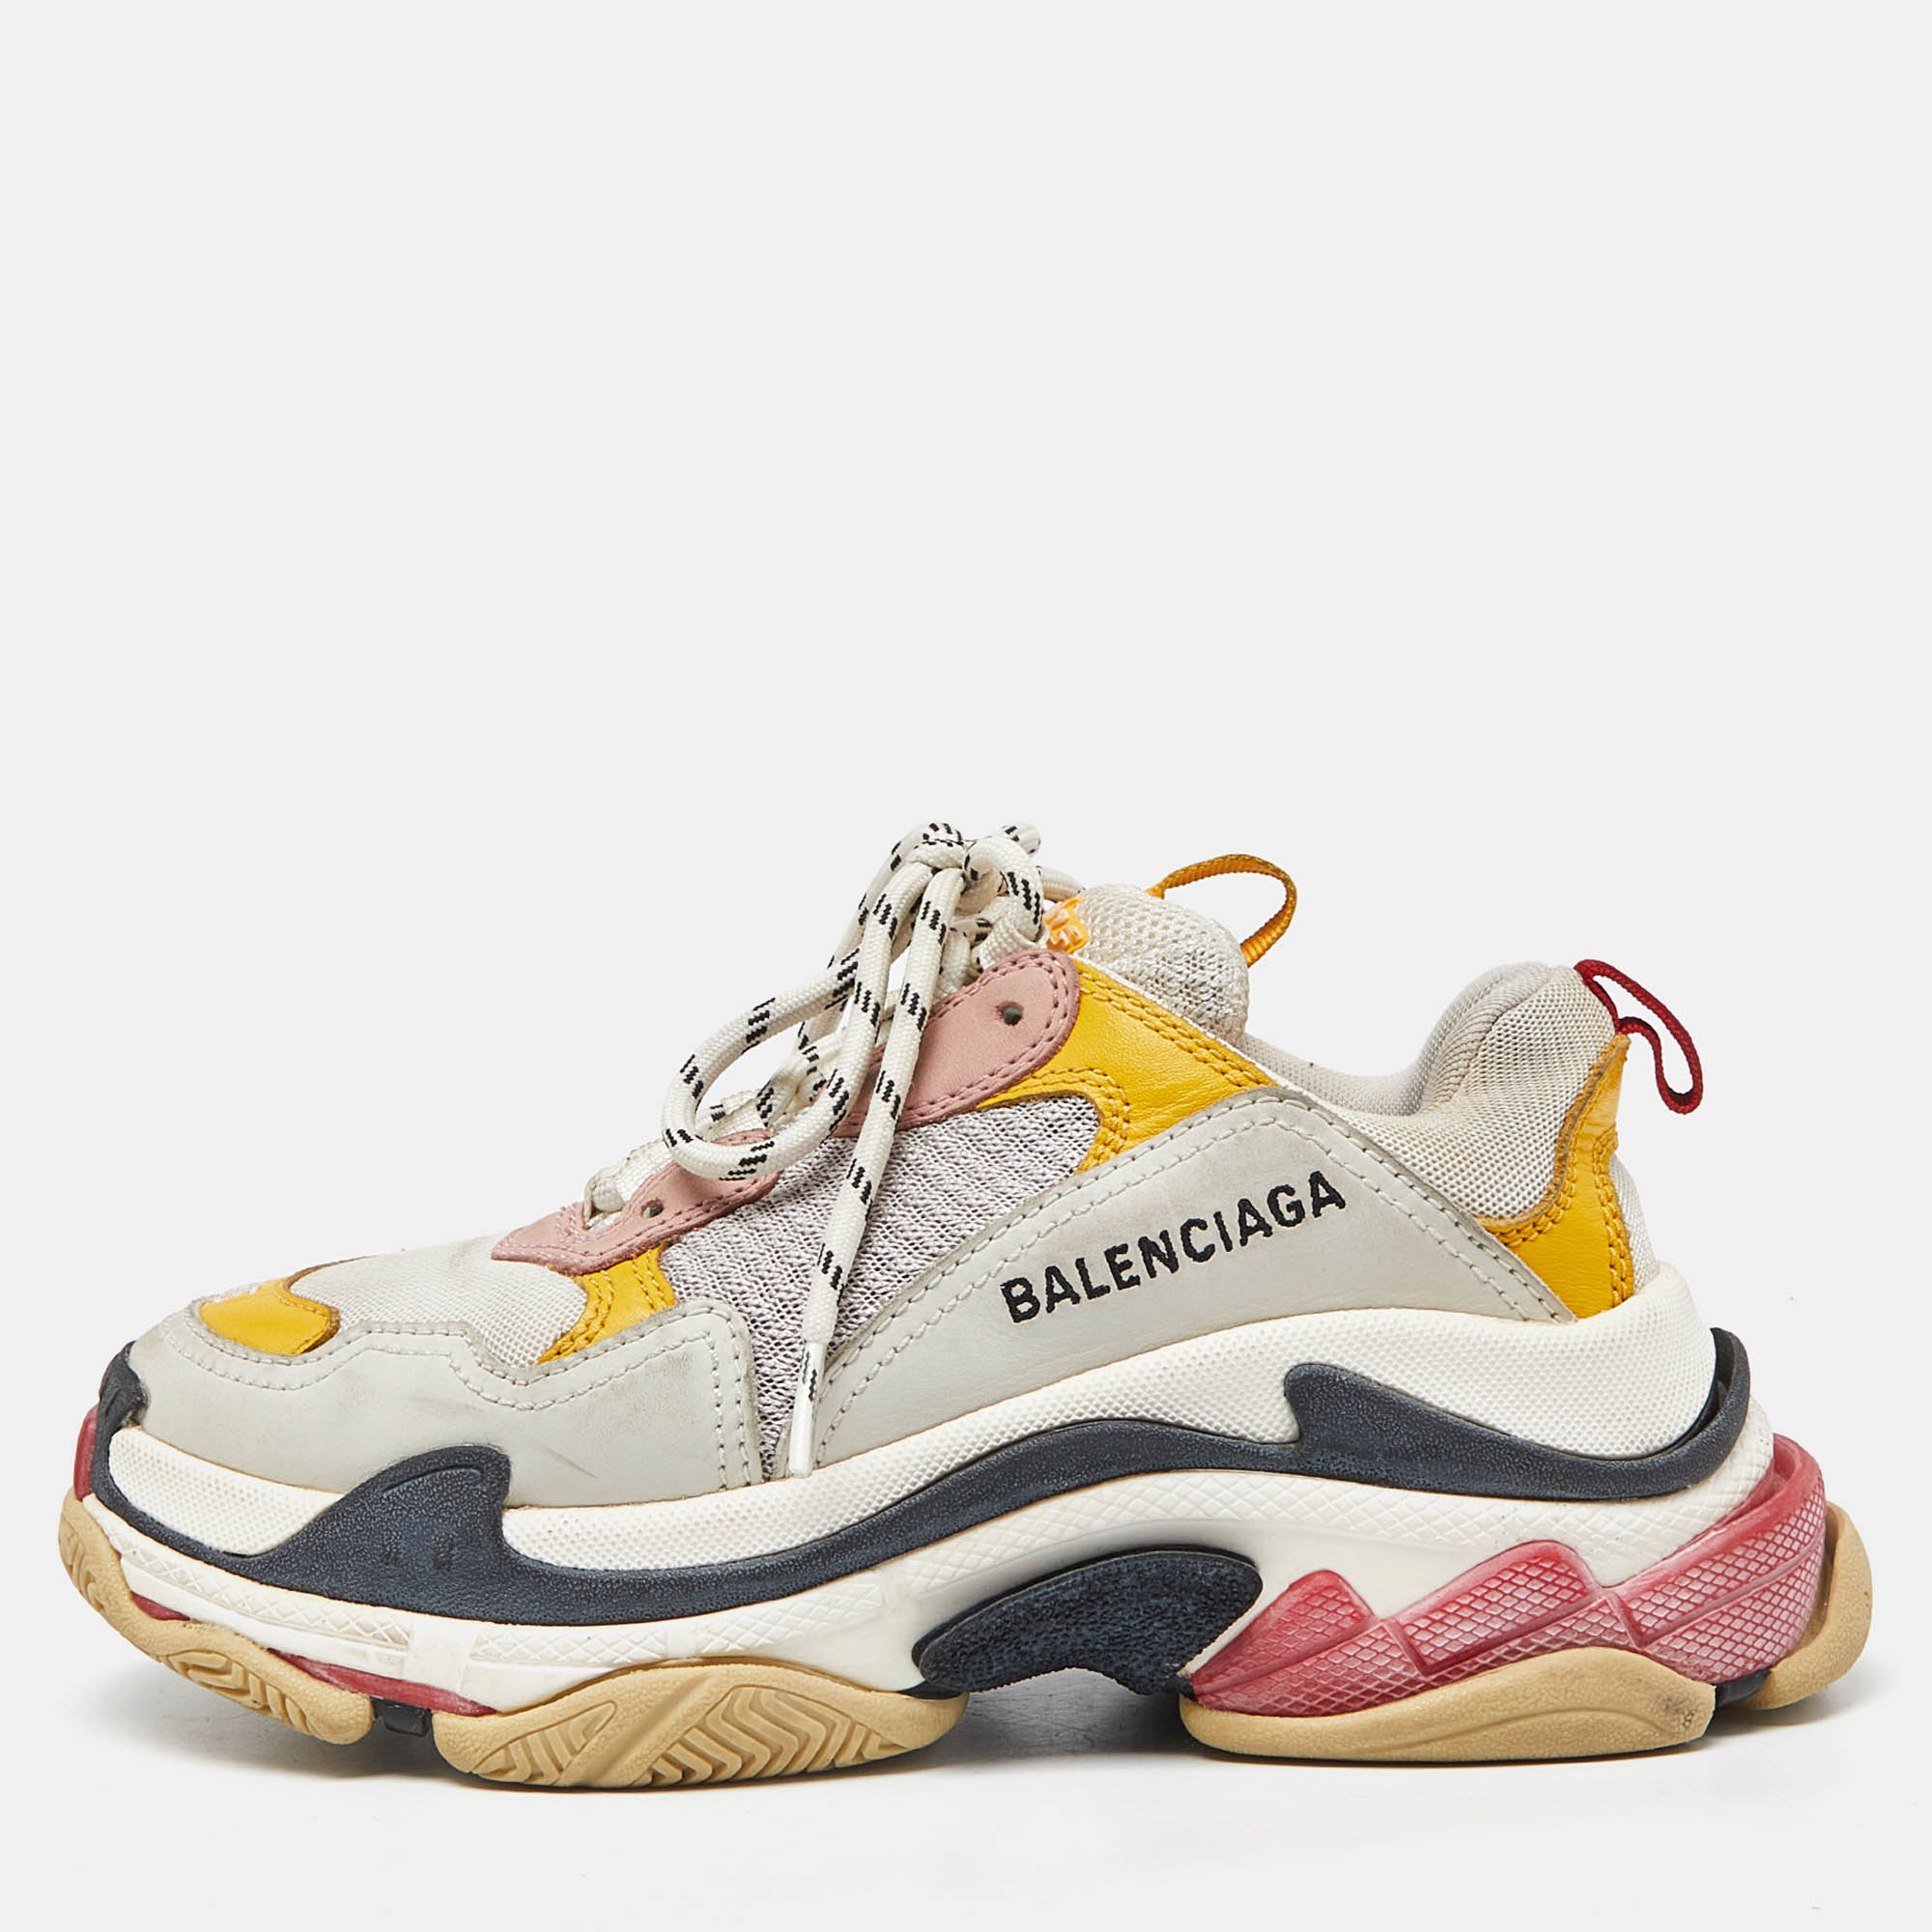 

Balenciaga Multicolor Leather and Mesh Triple S Low Top Sneakers Size